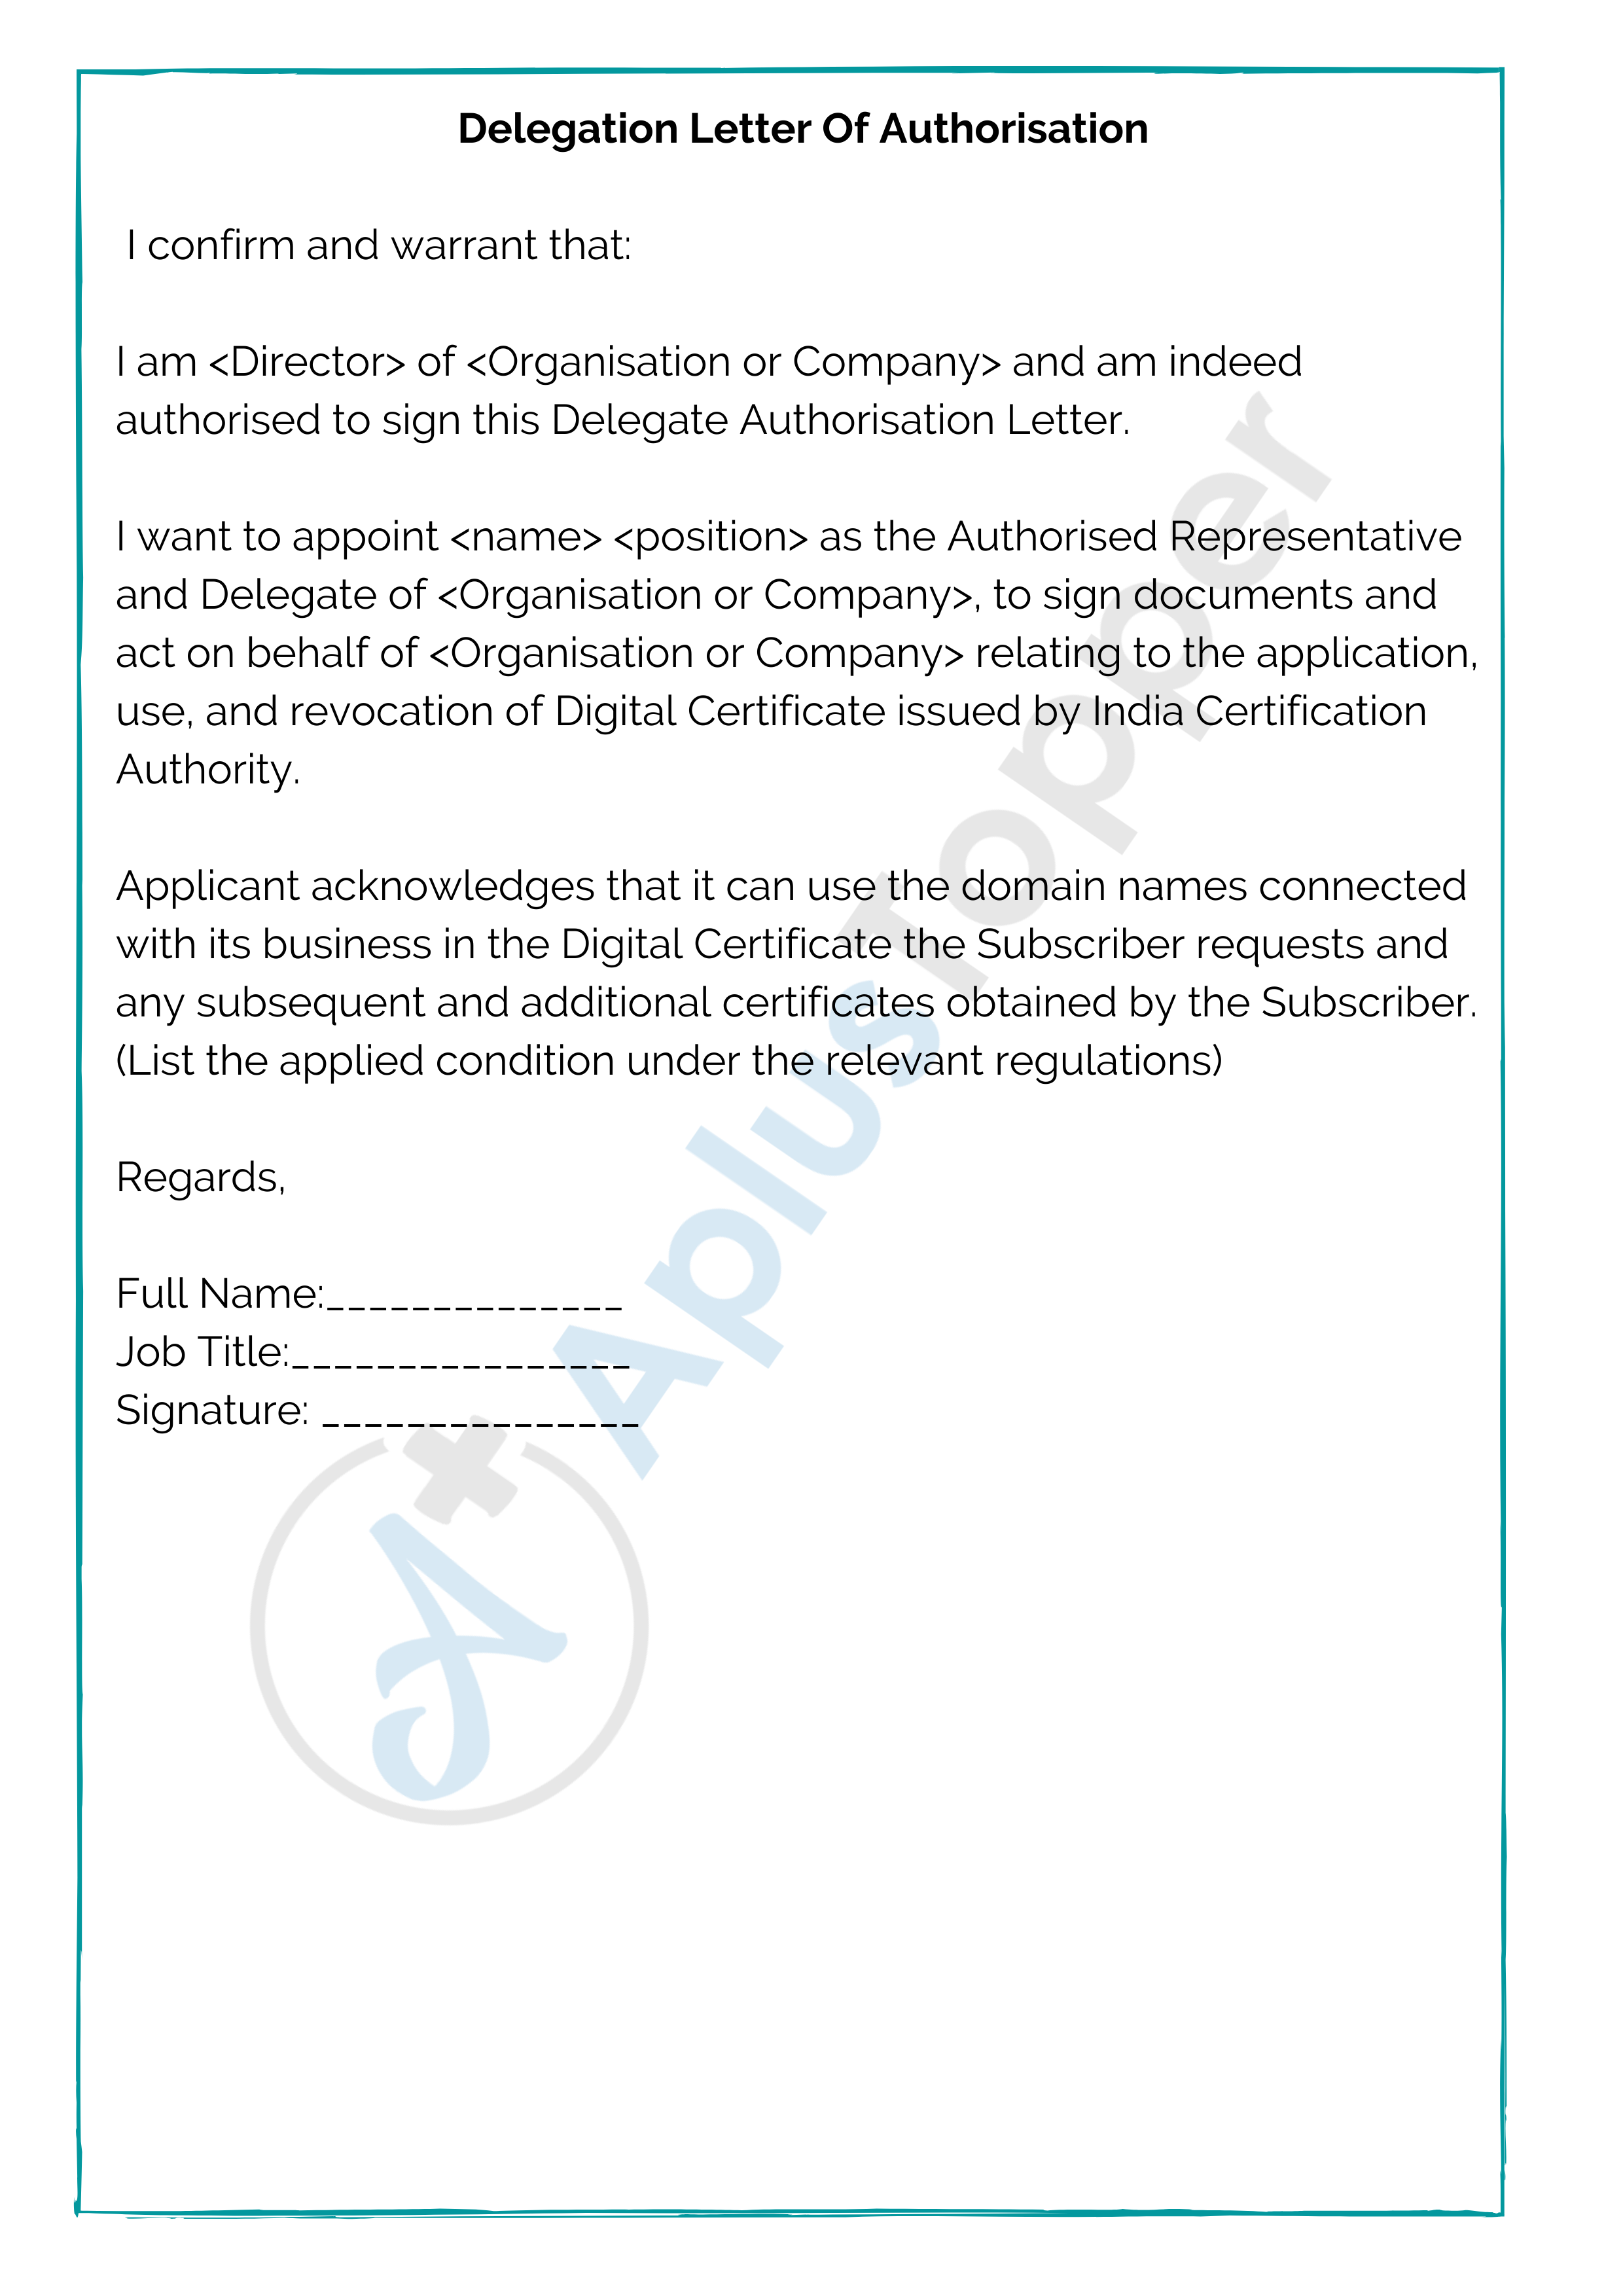 Sample Delegation Letters | Format, Samples, Examples and ...